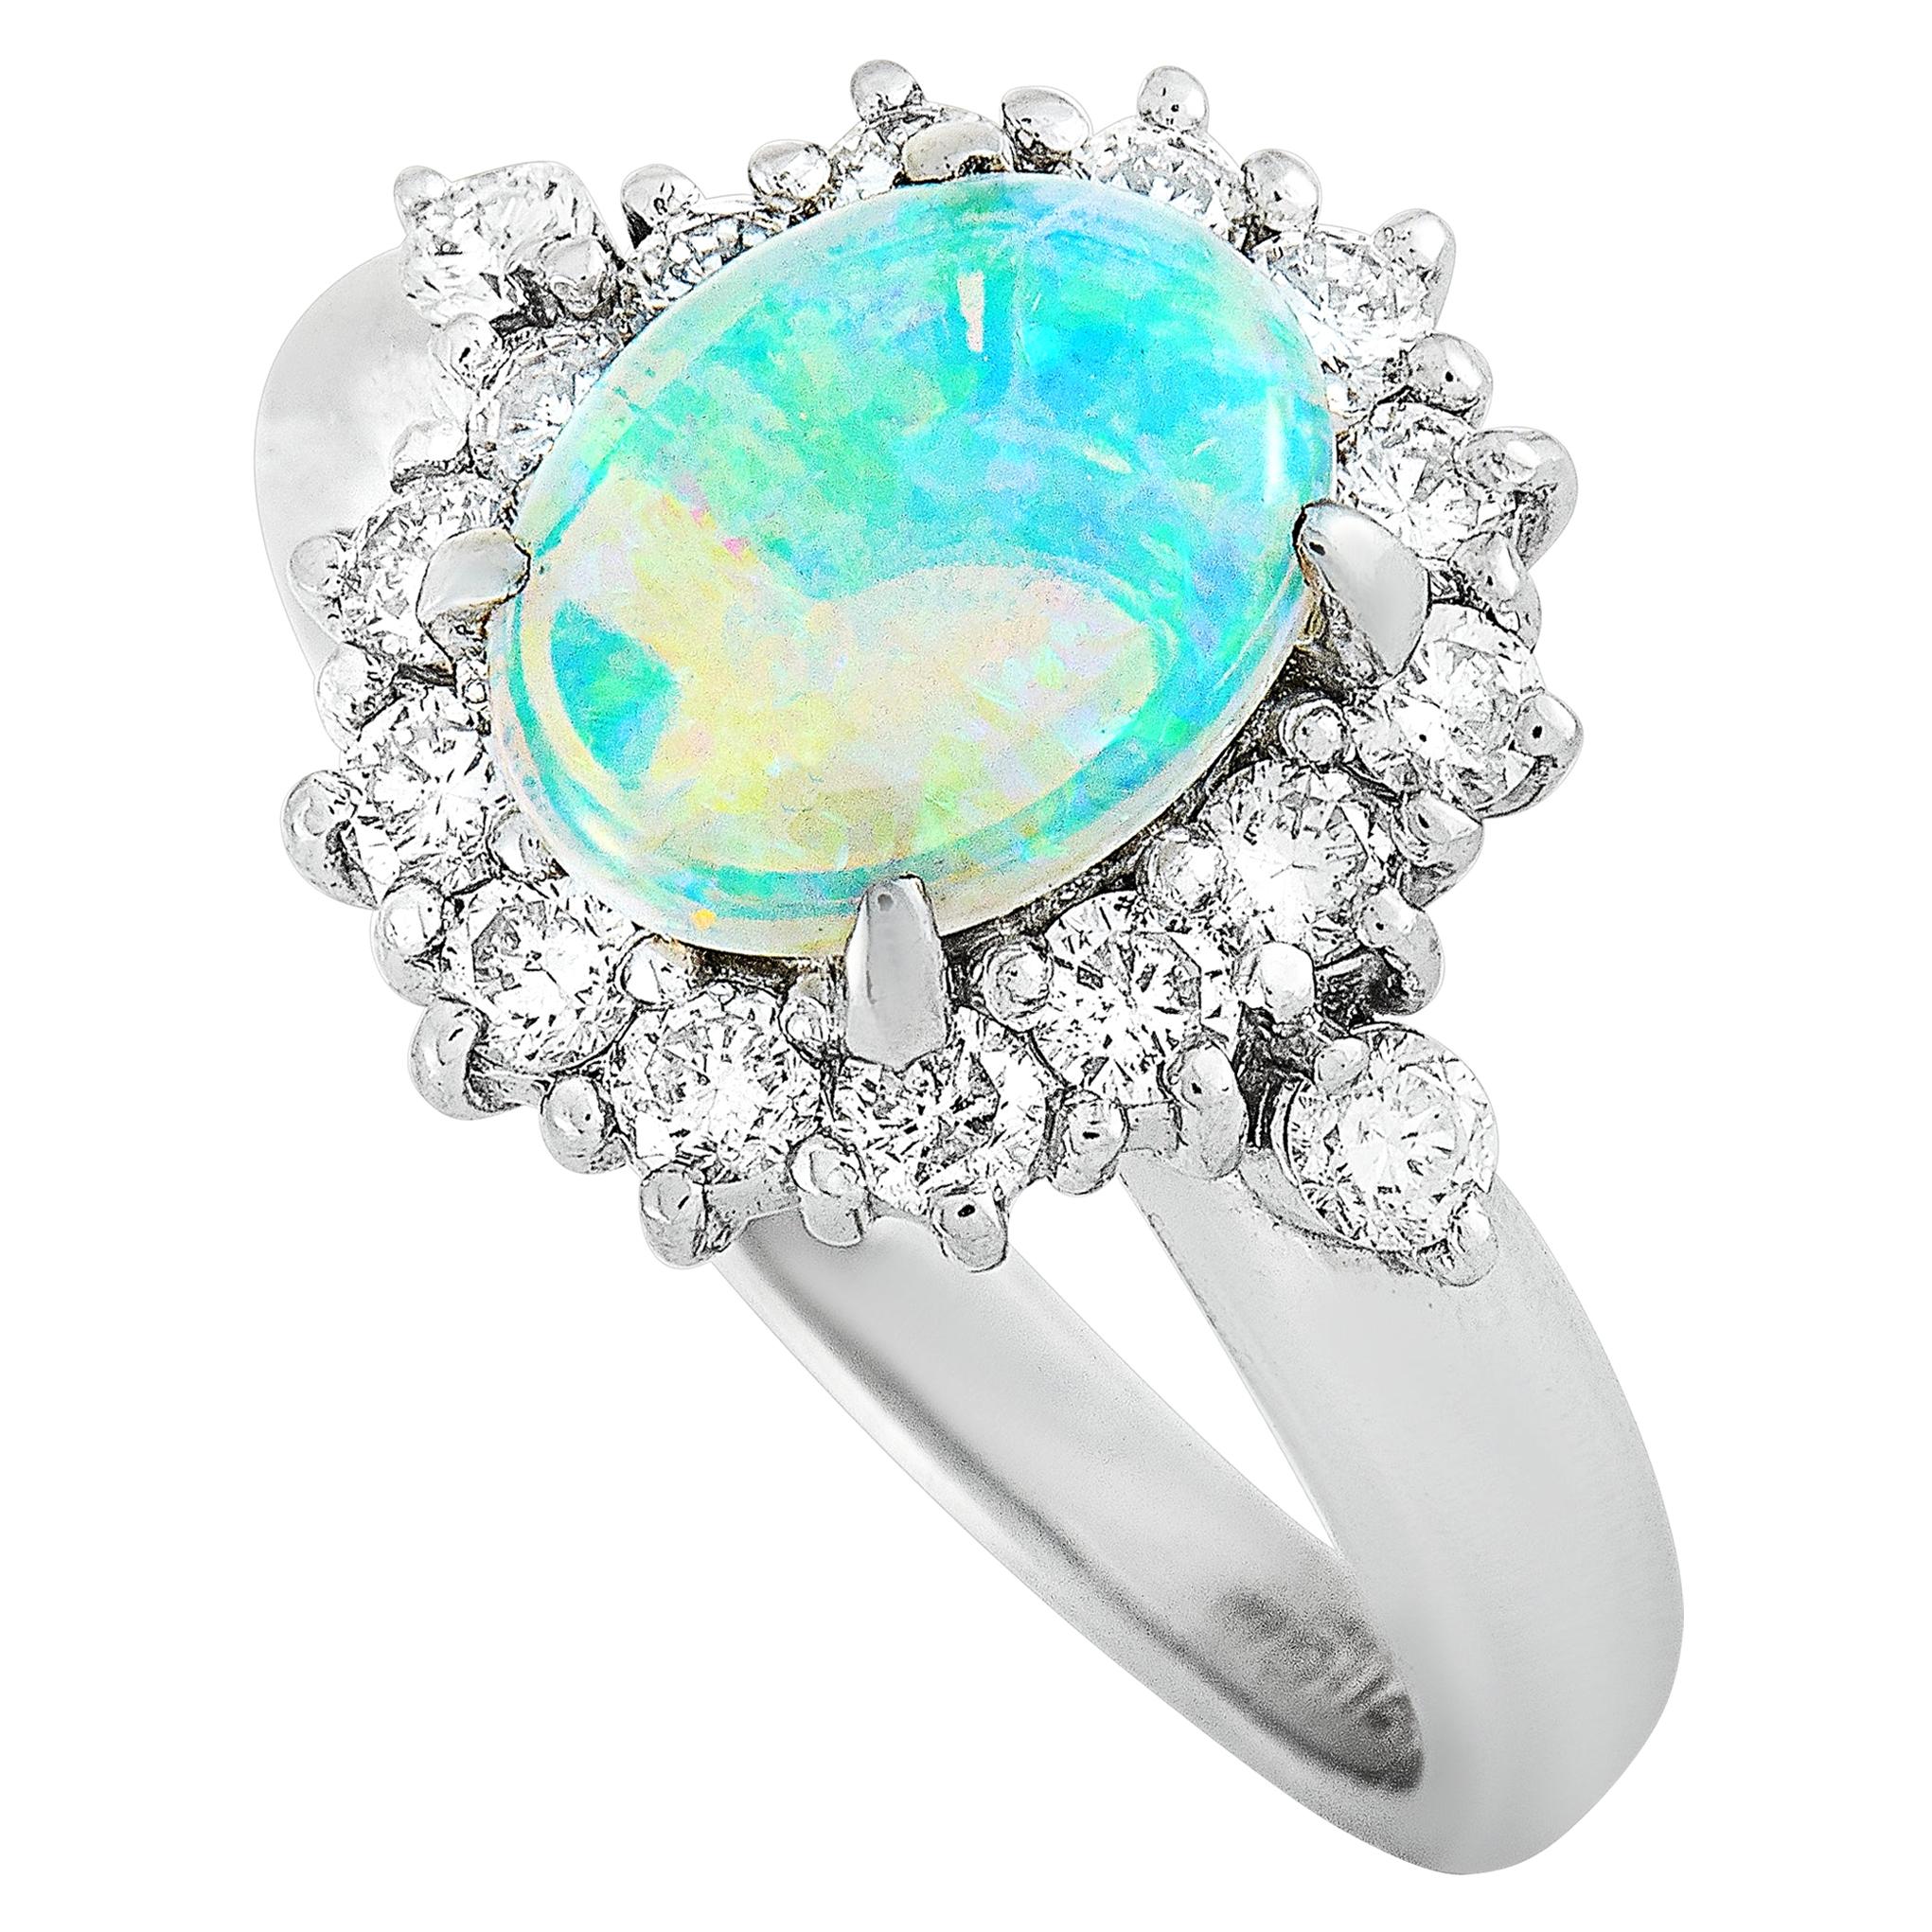 LB Exclusive Platinum 0.57 Carat Diamond and Opal Oval Ring